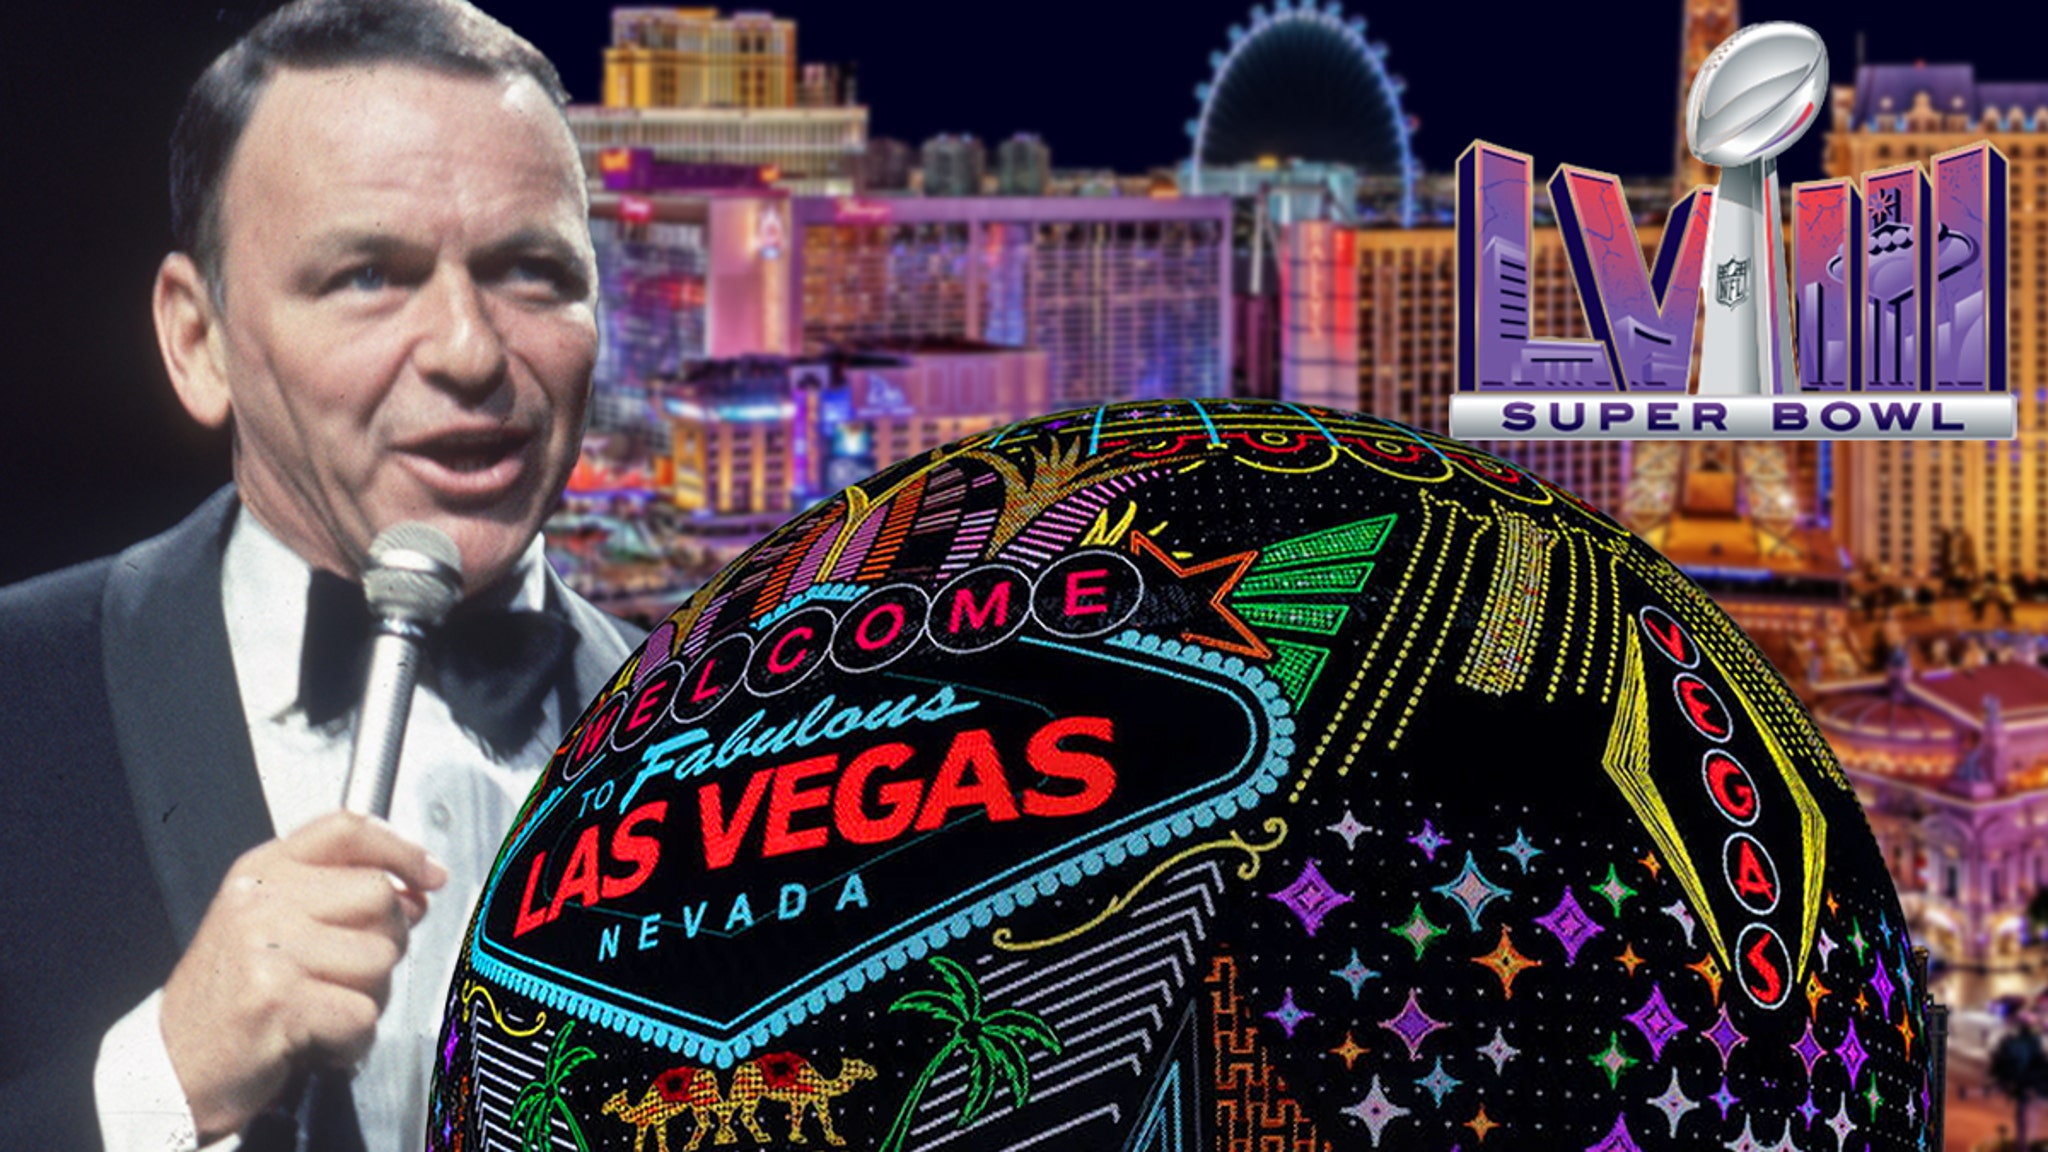 Tremendous Bowl Set to Pay Tribute to Las Vegas with Sinatra ‘My Means’ Broadcast